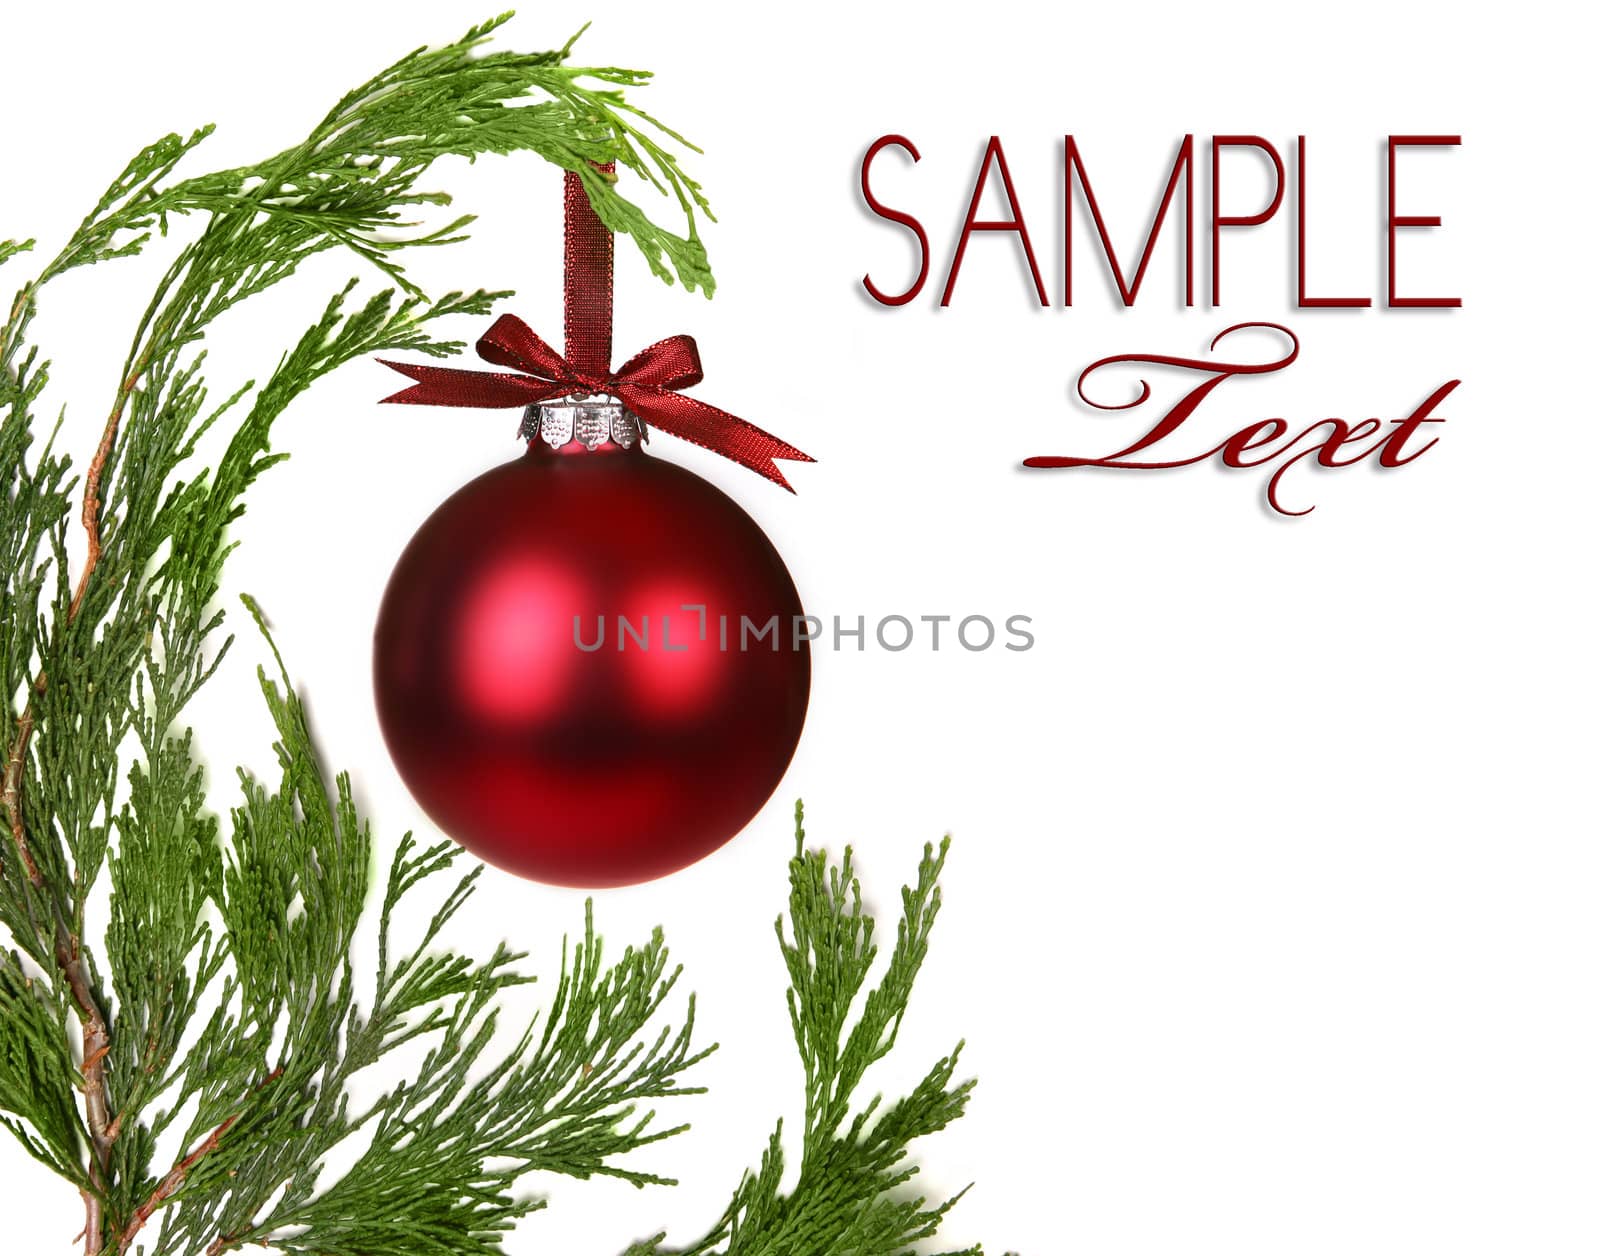 Evergreen Christmas Tree Branches With One Ornament With Copy Space For Your Own Message